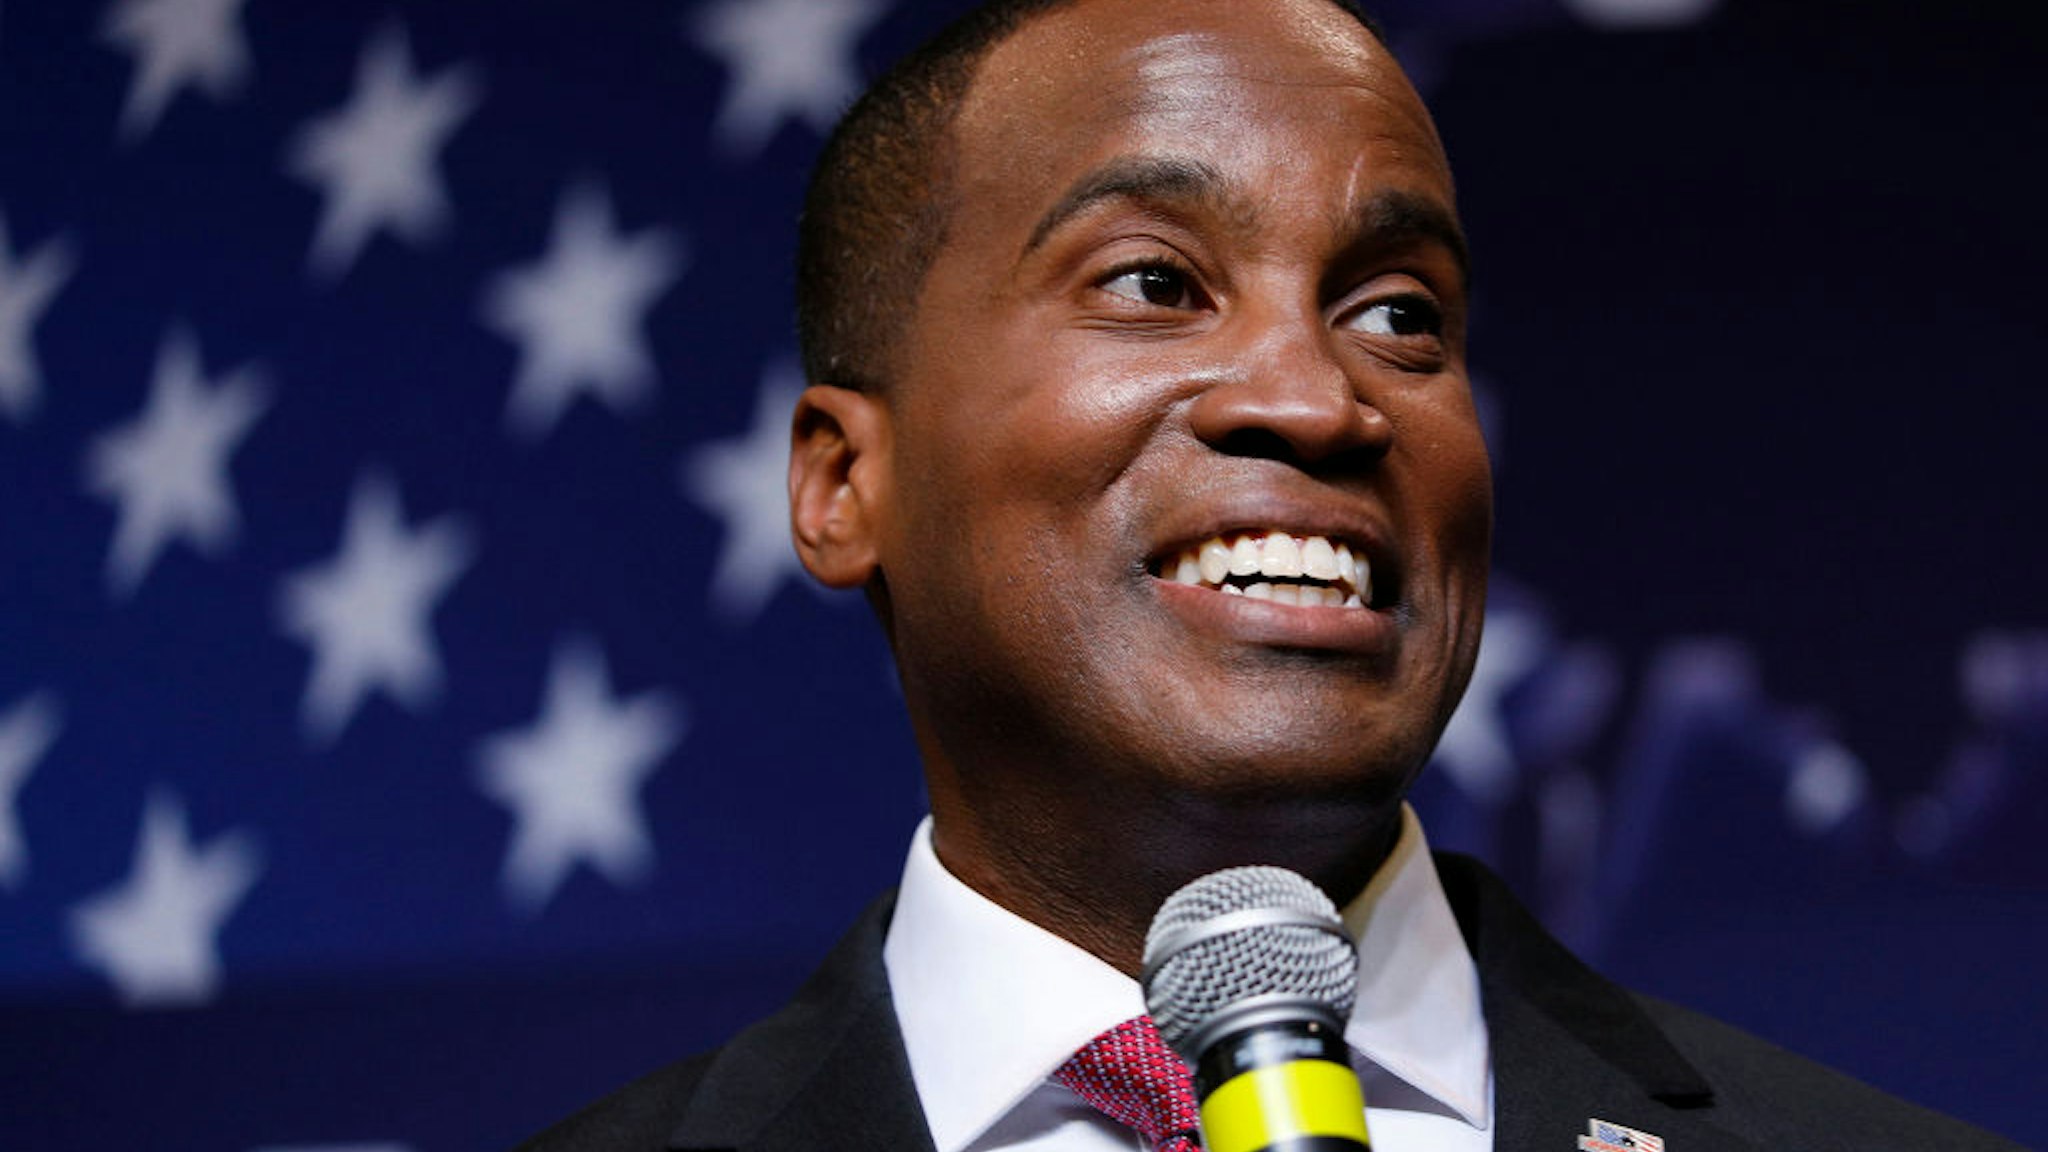 DETROIT, MI - AUGUST 7: John James, Michigan GOP Senate candidate, speaks at an election night event after winning his primary election at his business, James Group International August 7, 2018 in Detroit, Michigan. James, who has President Donald Trump's endorsement, will face Democrat incumbent Senator Debbie Stabenow (D-MI) in November. (Photo by Bill Pugliano/Getty Images)